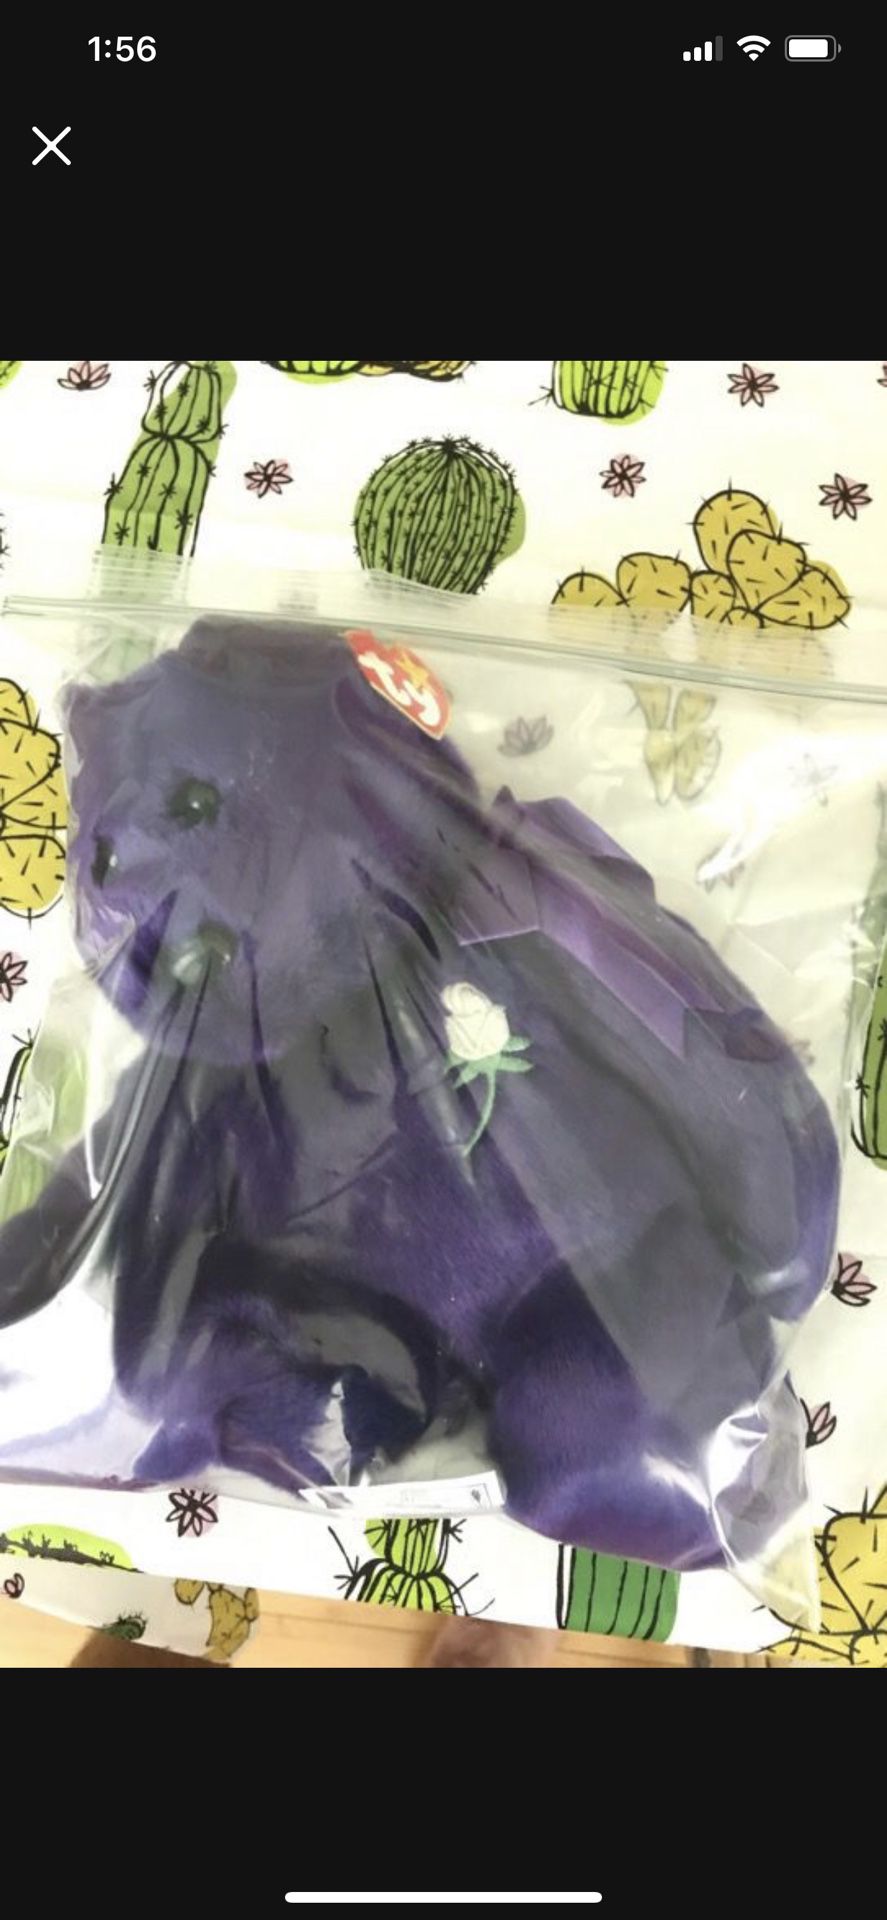 Princess Diana TY beanie baby. Kept In Ziplock Bag With Desiccant To Keep Fresh  